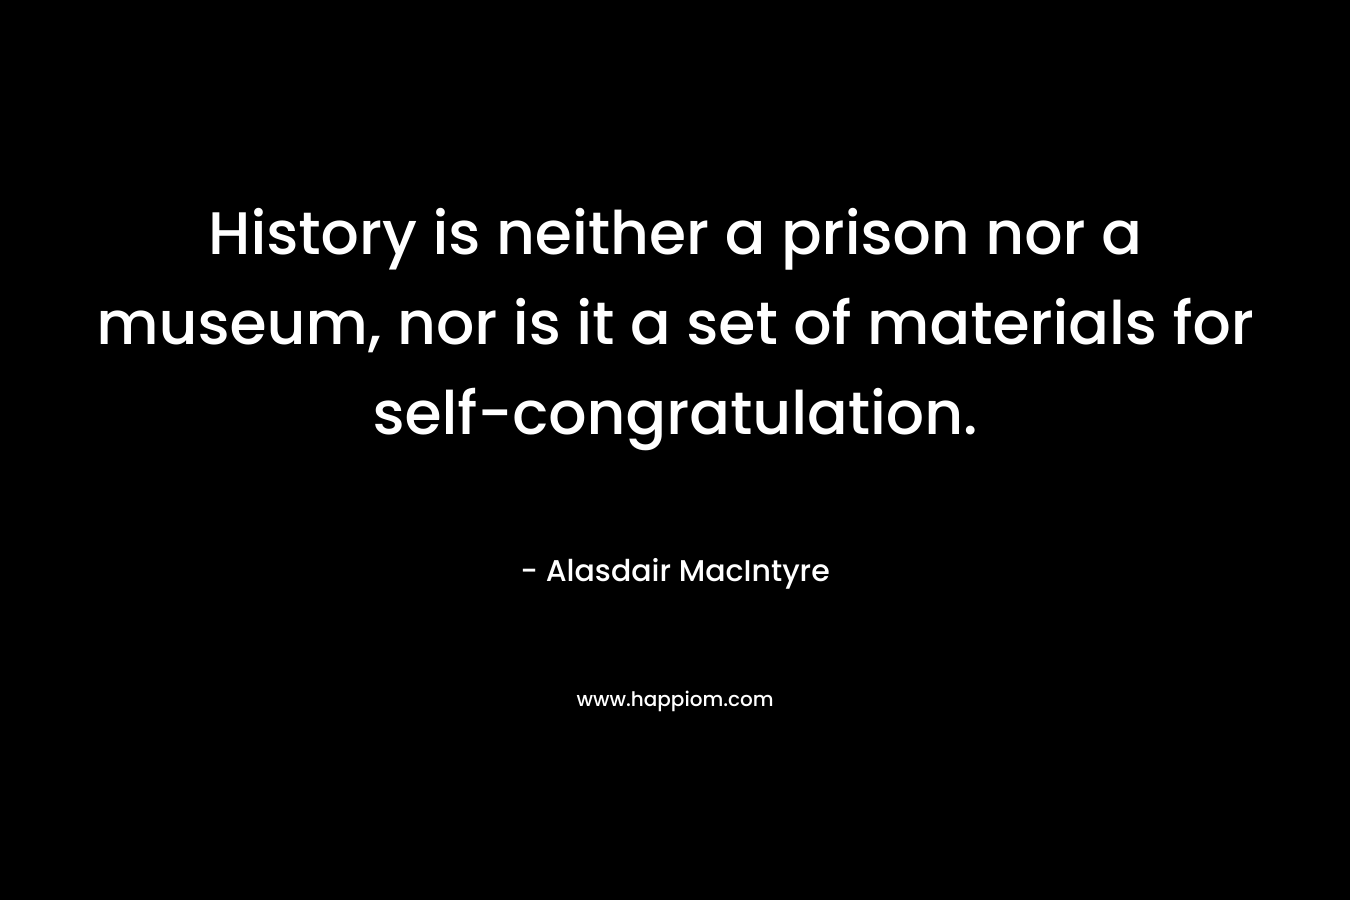 History is neither a prison nor a museum, nor is it a set of materials for self-congratulation. – Alasdair MacIntyre